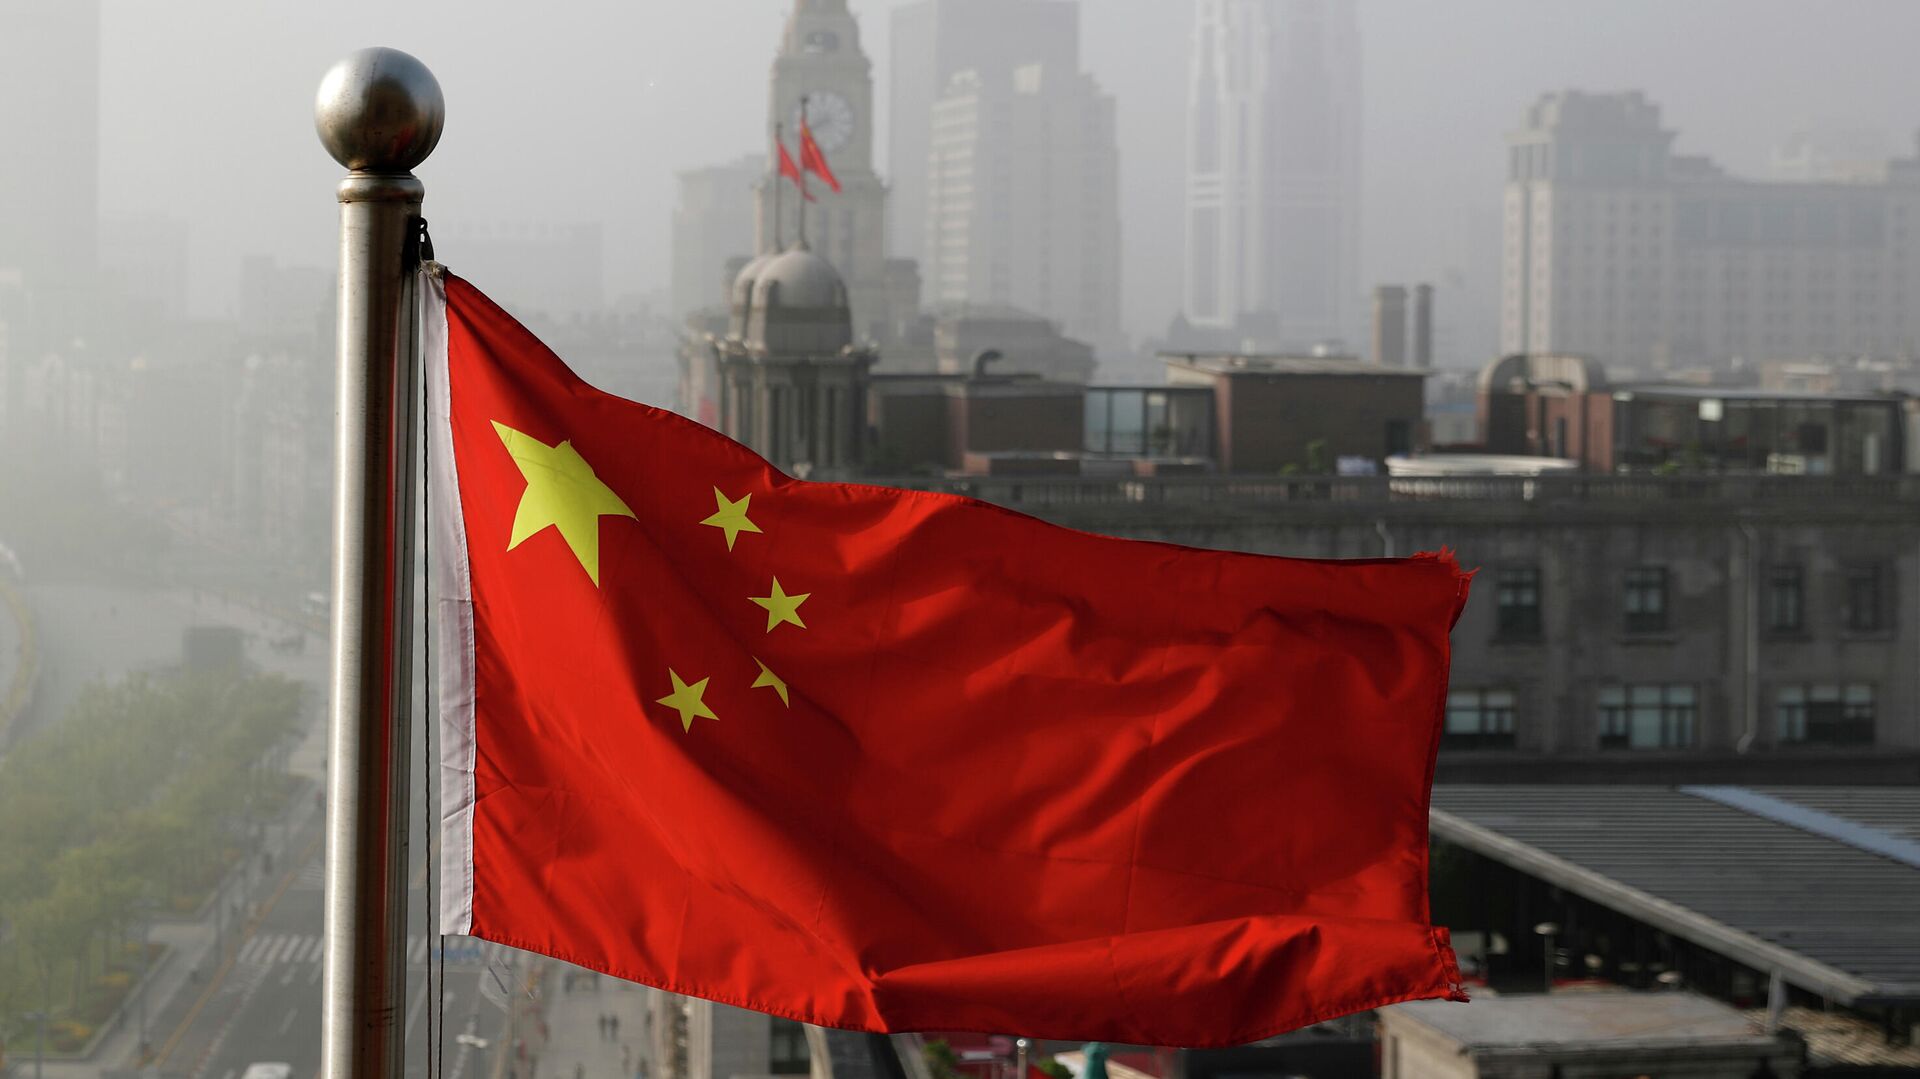 FILE - In this April 14, 2016 file photo, a Chinese national flag flutters against the office buildings in Shanghai, China - Sputnik International, 1920, 10.12.2021